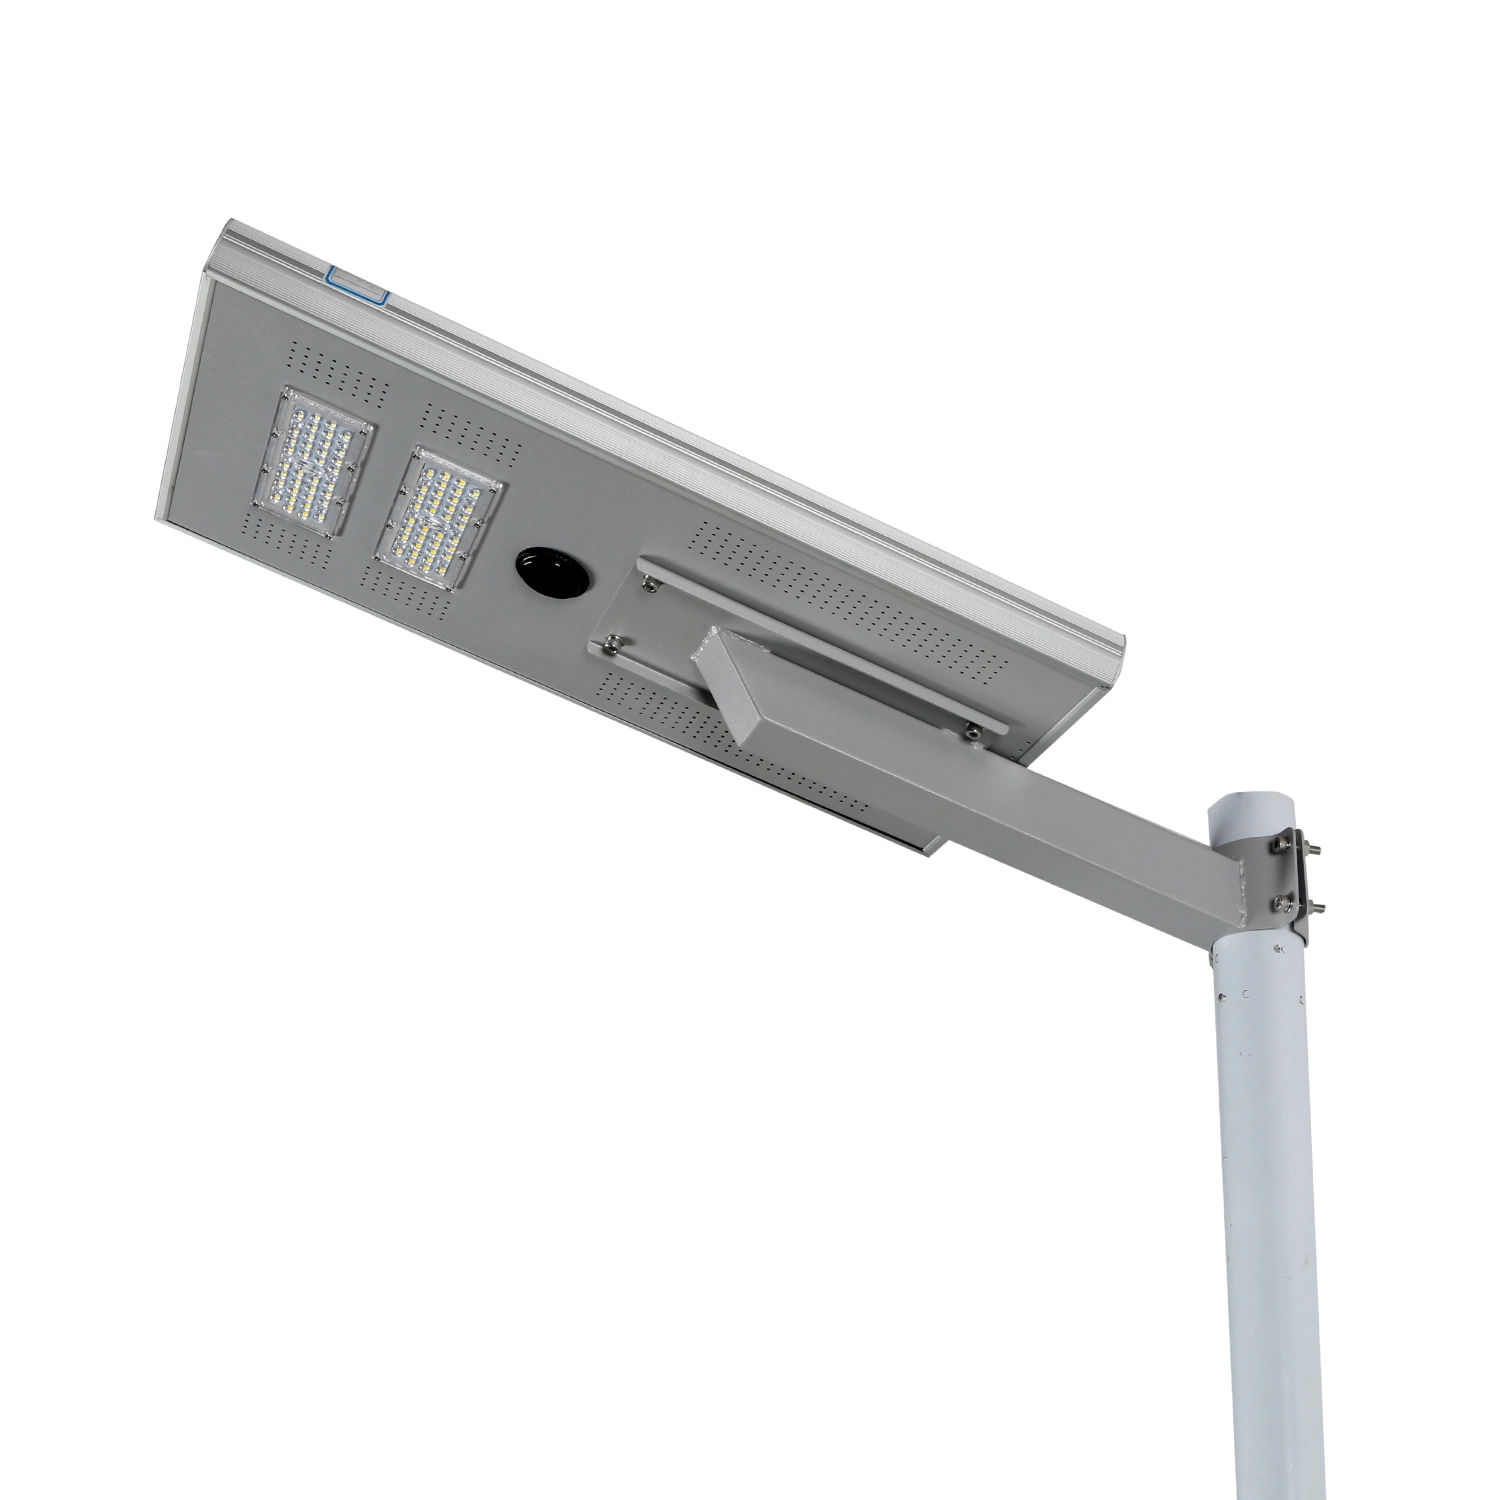 Professional China Manufacturer 40W LED Solar Street Light All in One Solar Road Lighting with Microwave Radar Sensor